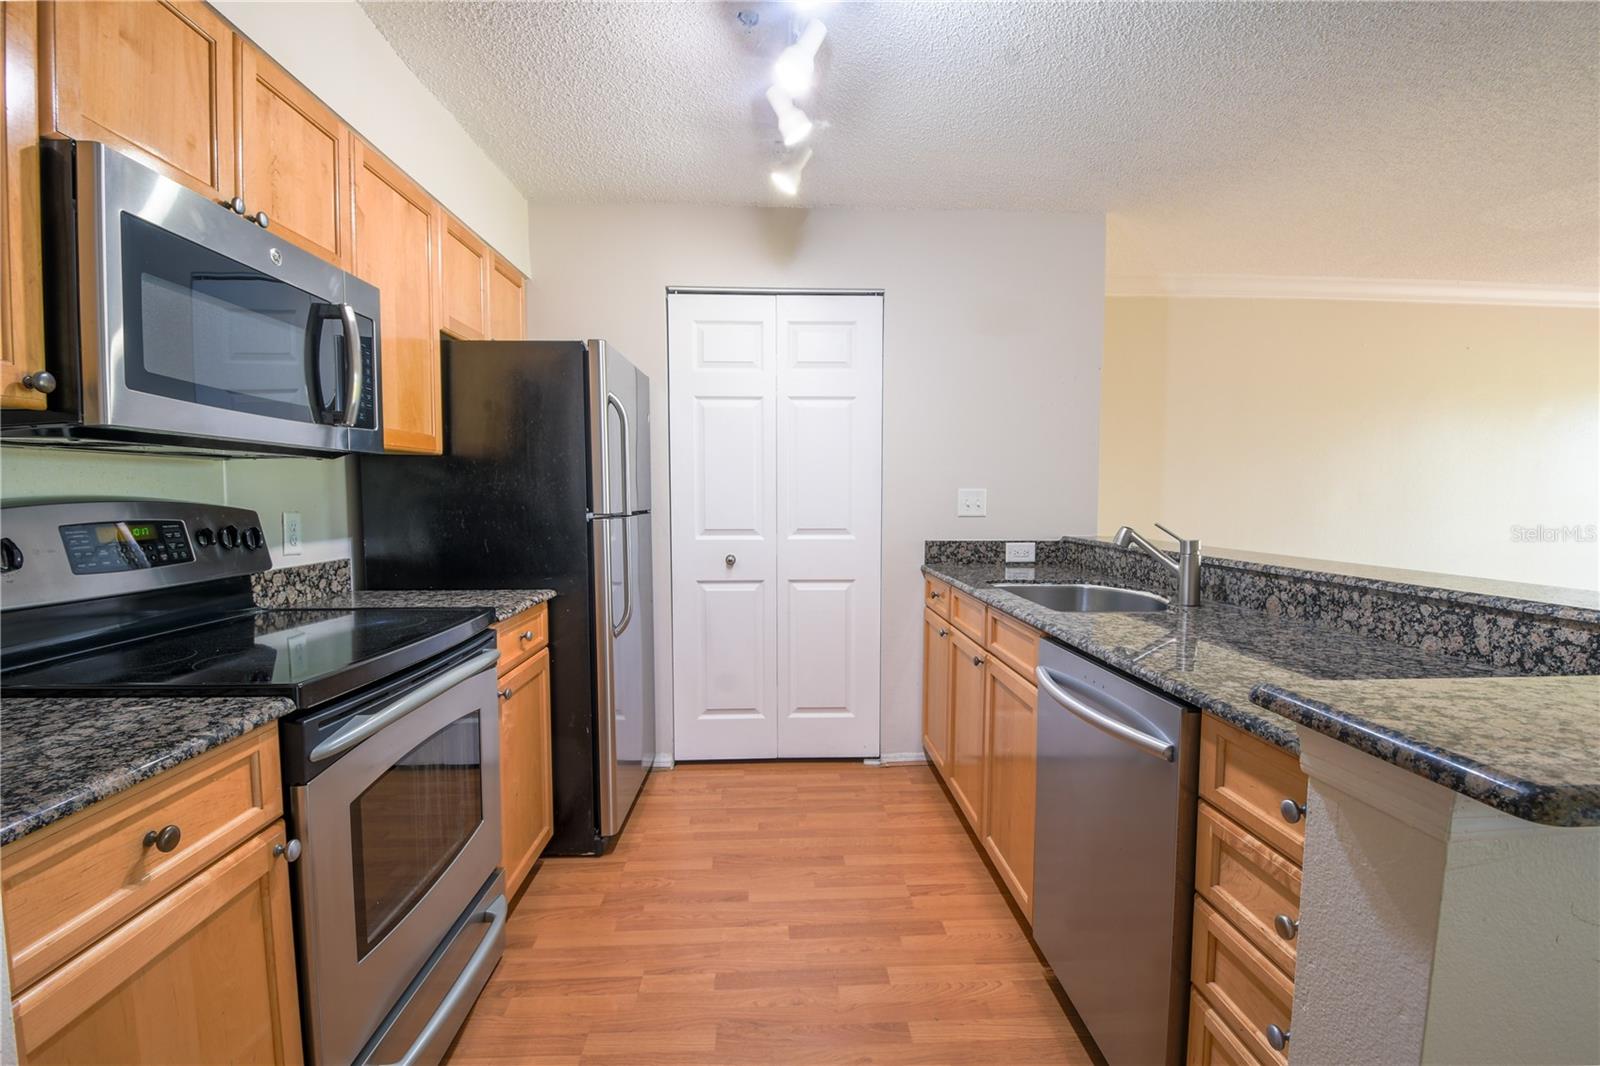 The kitchen features a suite of of stainless steel appliances.